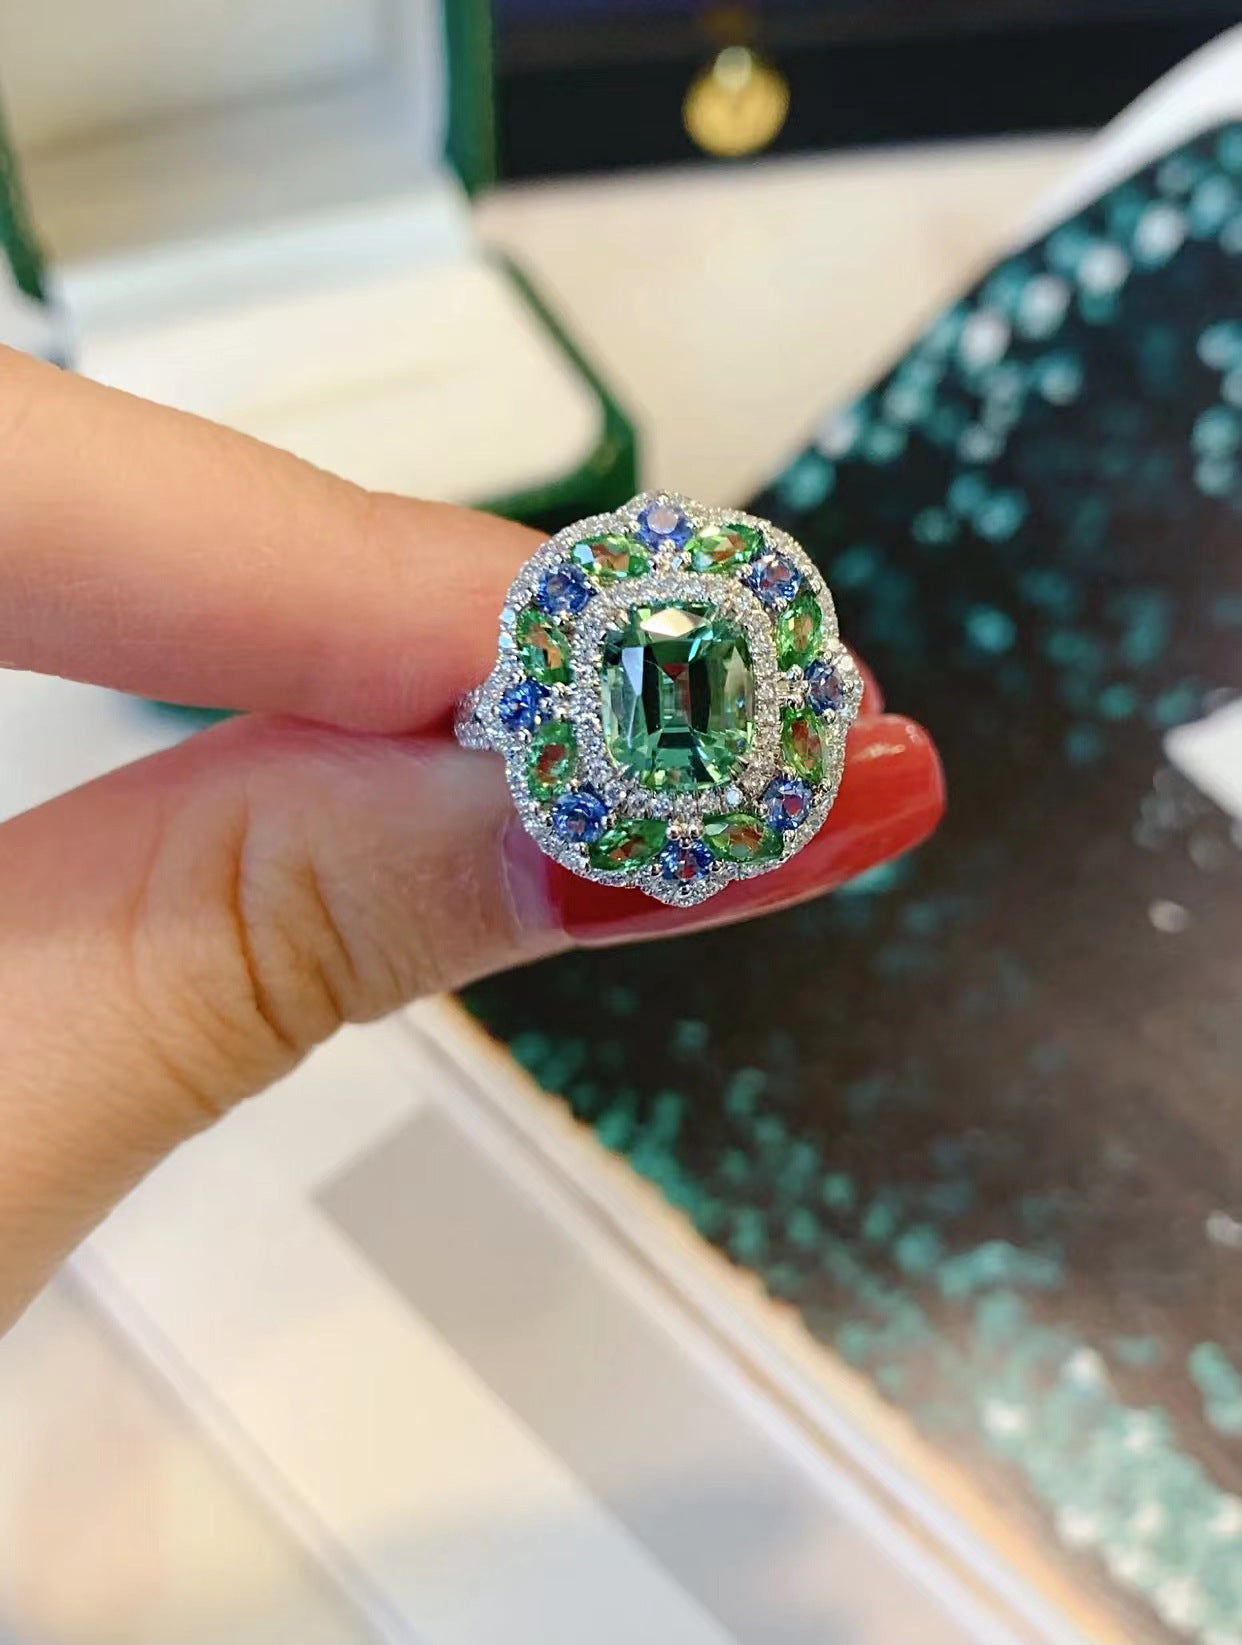 2022 New European And American Style Ring S925 Sterling Silver Secret Garden Afghanistan Green Tourmaline Senior Women's Ring Wholesale